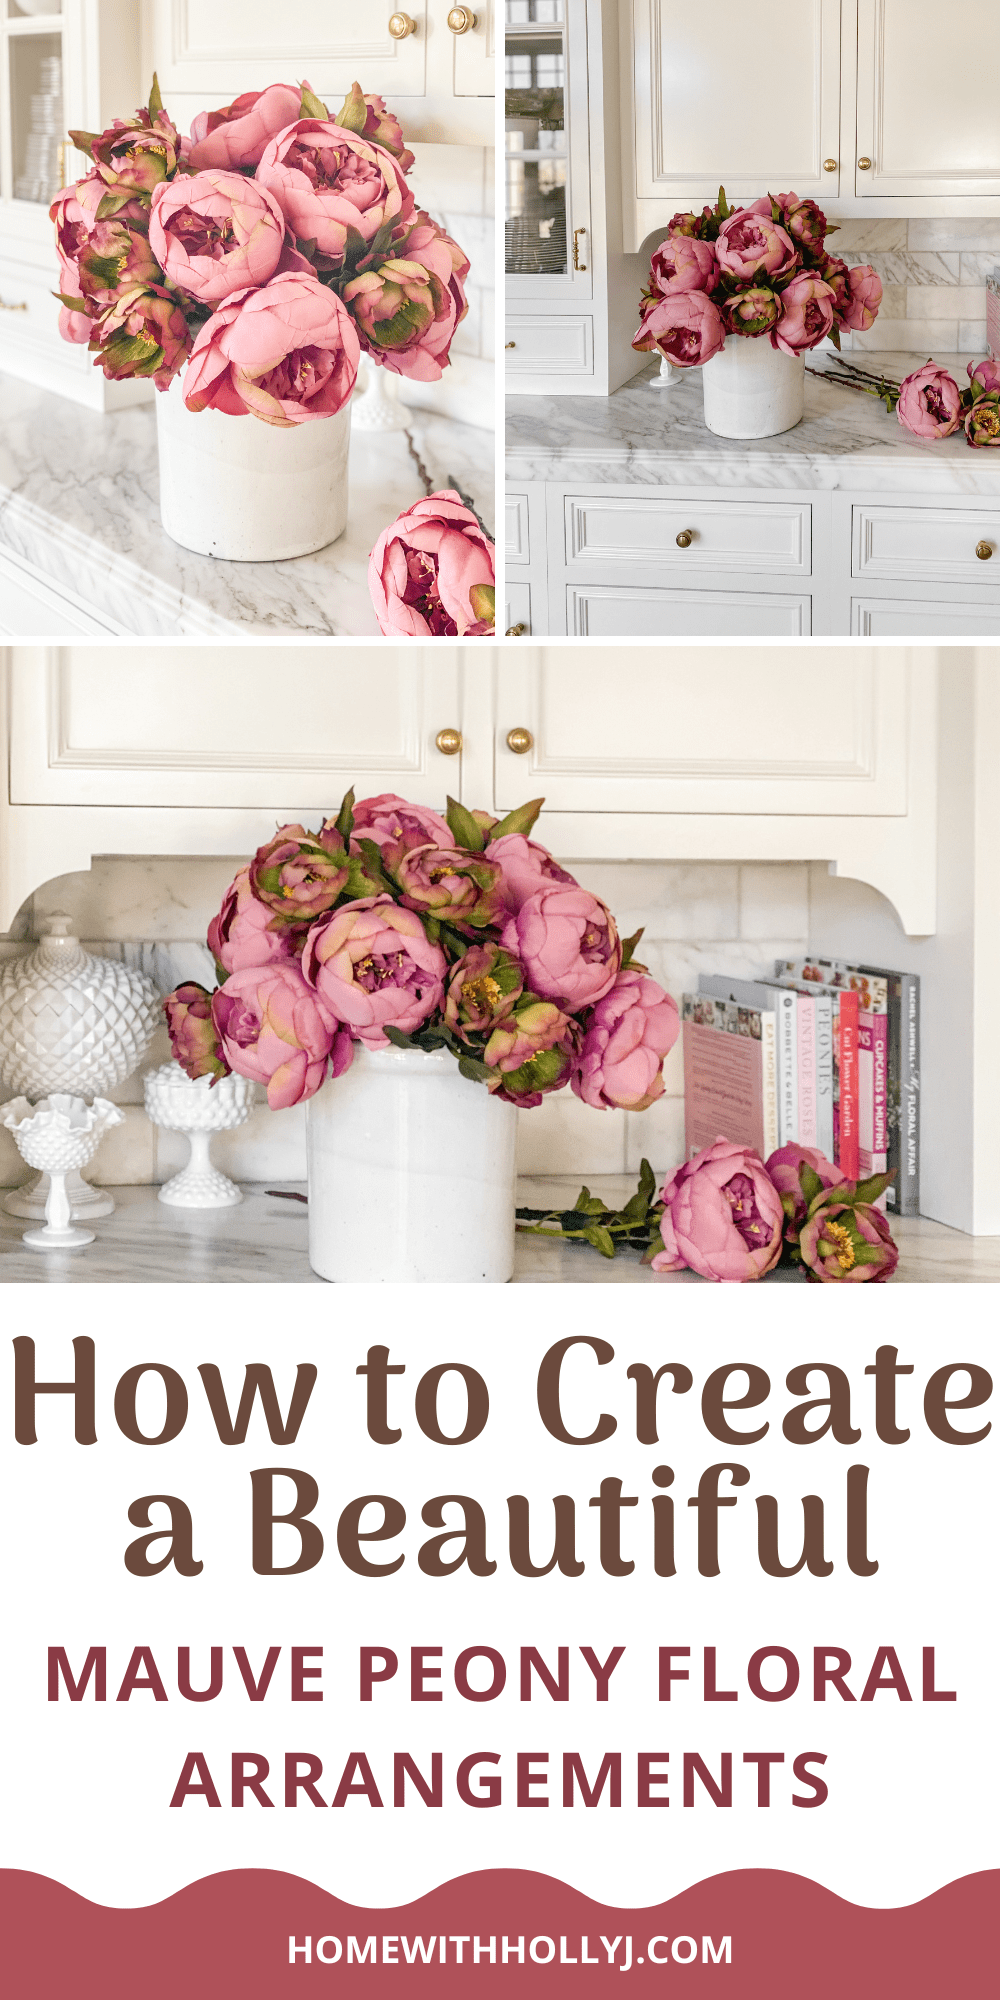 Learn how to arrange mauve faux peonies for beautiful and lasting spring floral arrangements with this step-by-step guide.